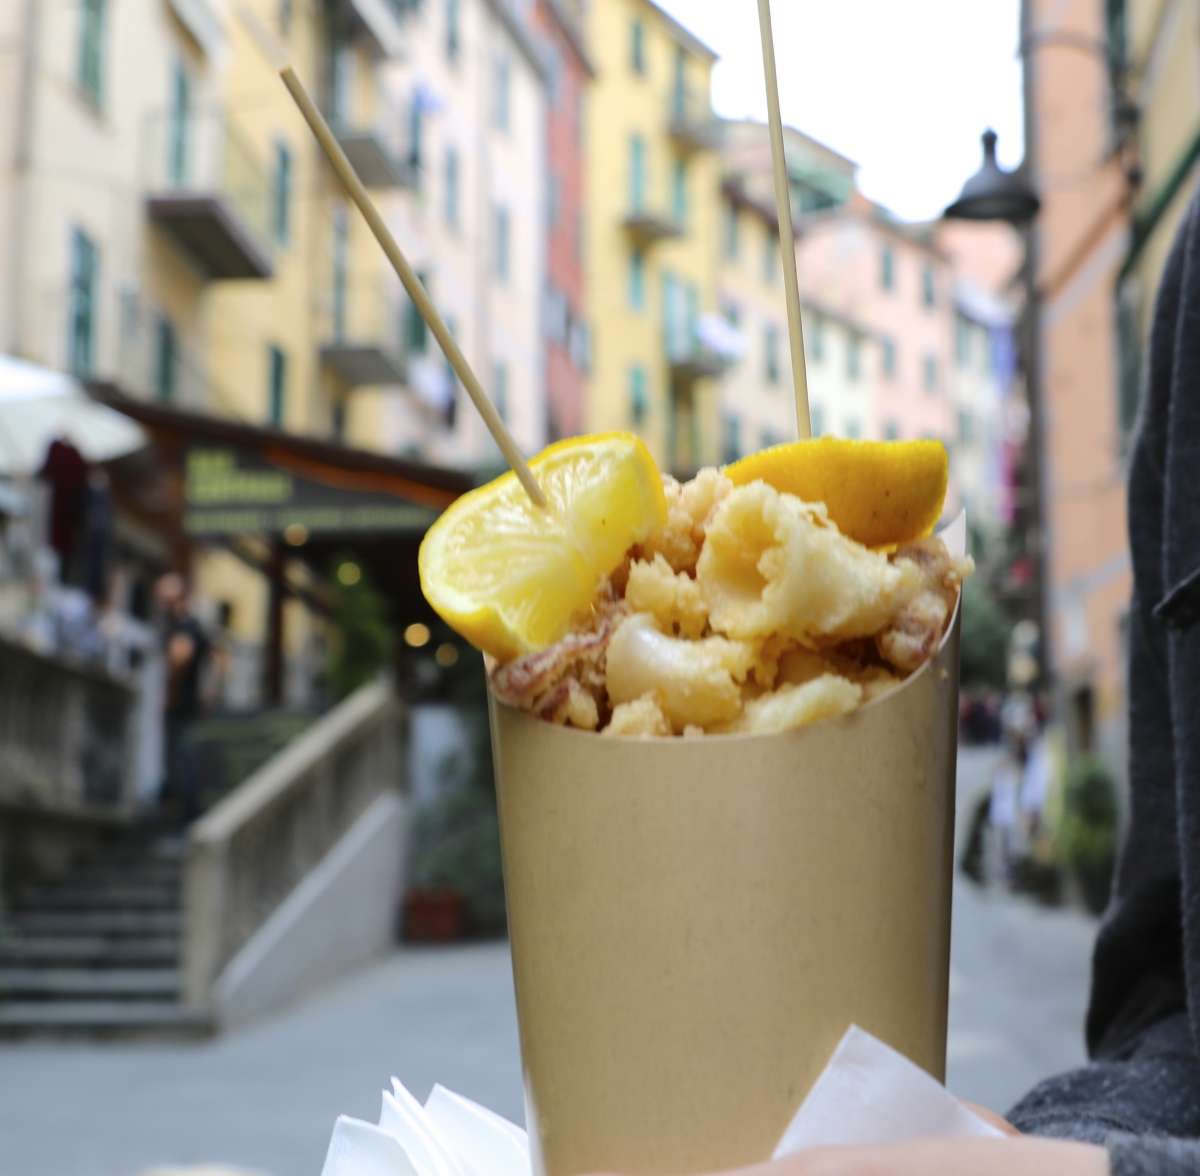 Sea Food Cone:  One street food item that is a real head turner is the fried seafood cones.  Piled high in a paper cone with a few long skewers, you get to sample whole local shrimp, calamari, baby squid and anchovies.  All it needs is a little squeeze of lemon and it’s ready to go!  